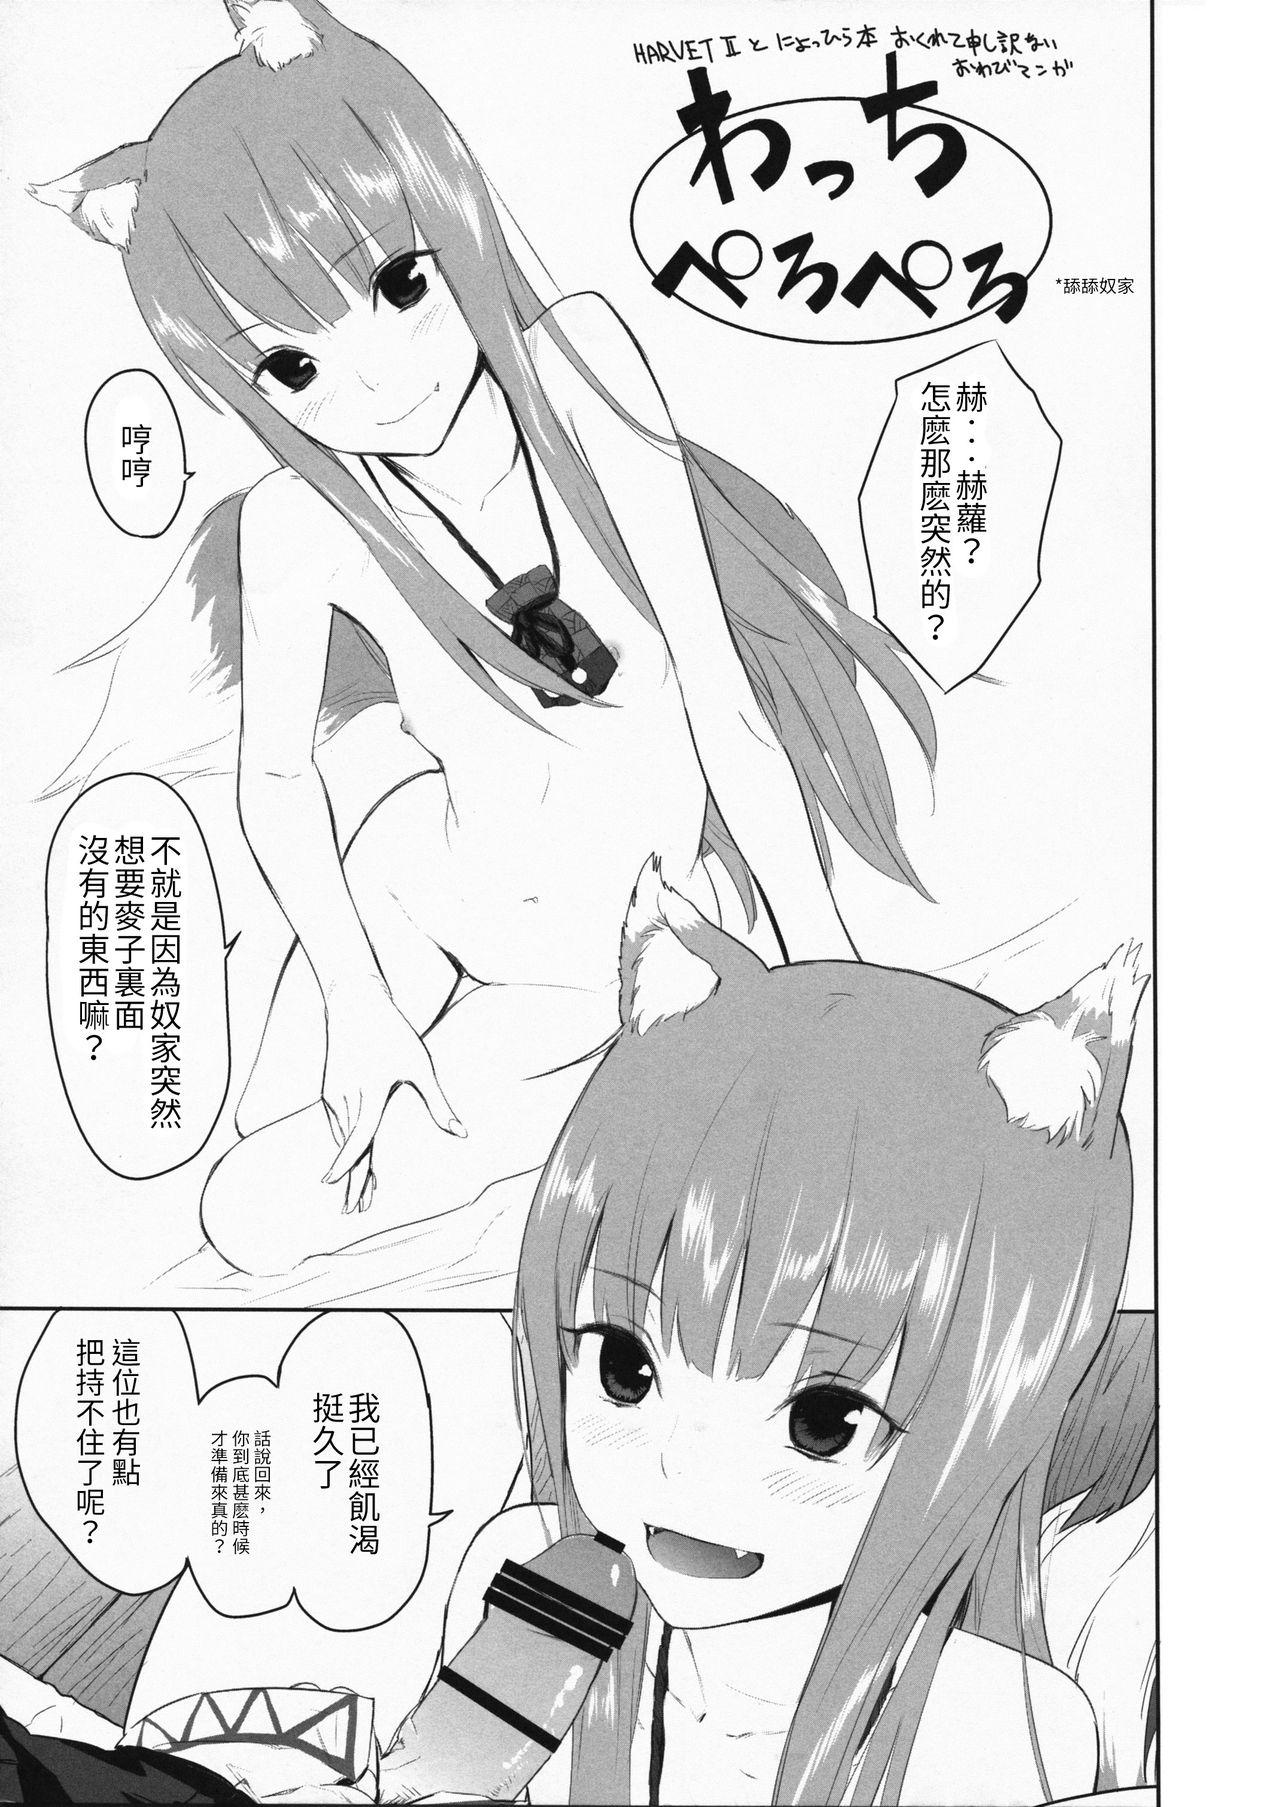 Gonzo Ajisai Maiden vol.1 - Code geass Spice and wolf Dragons crown Un go Gay Medic - Page 11